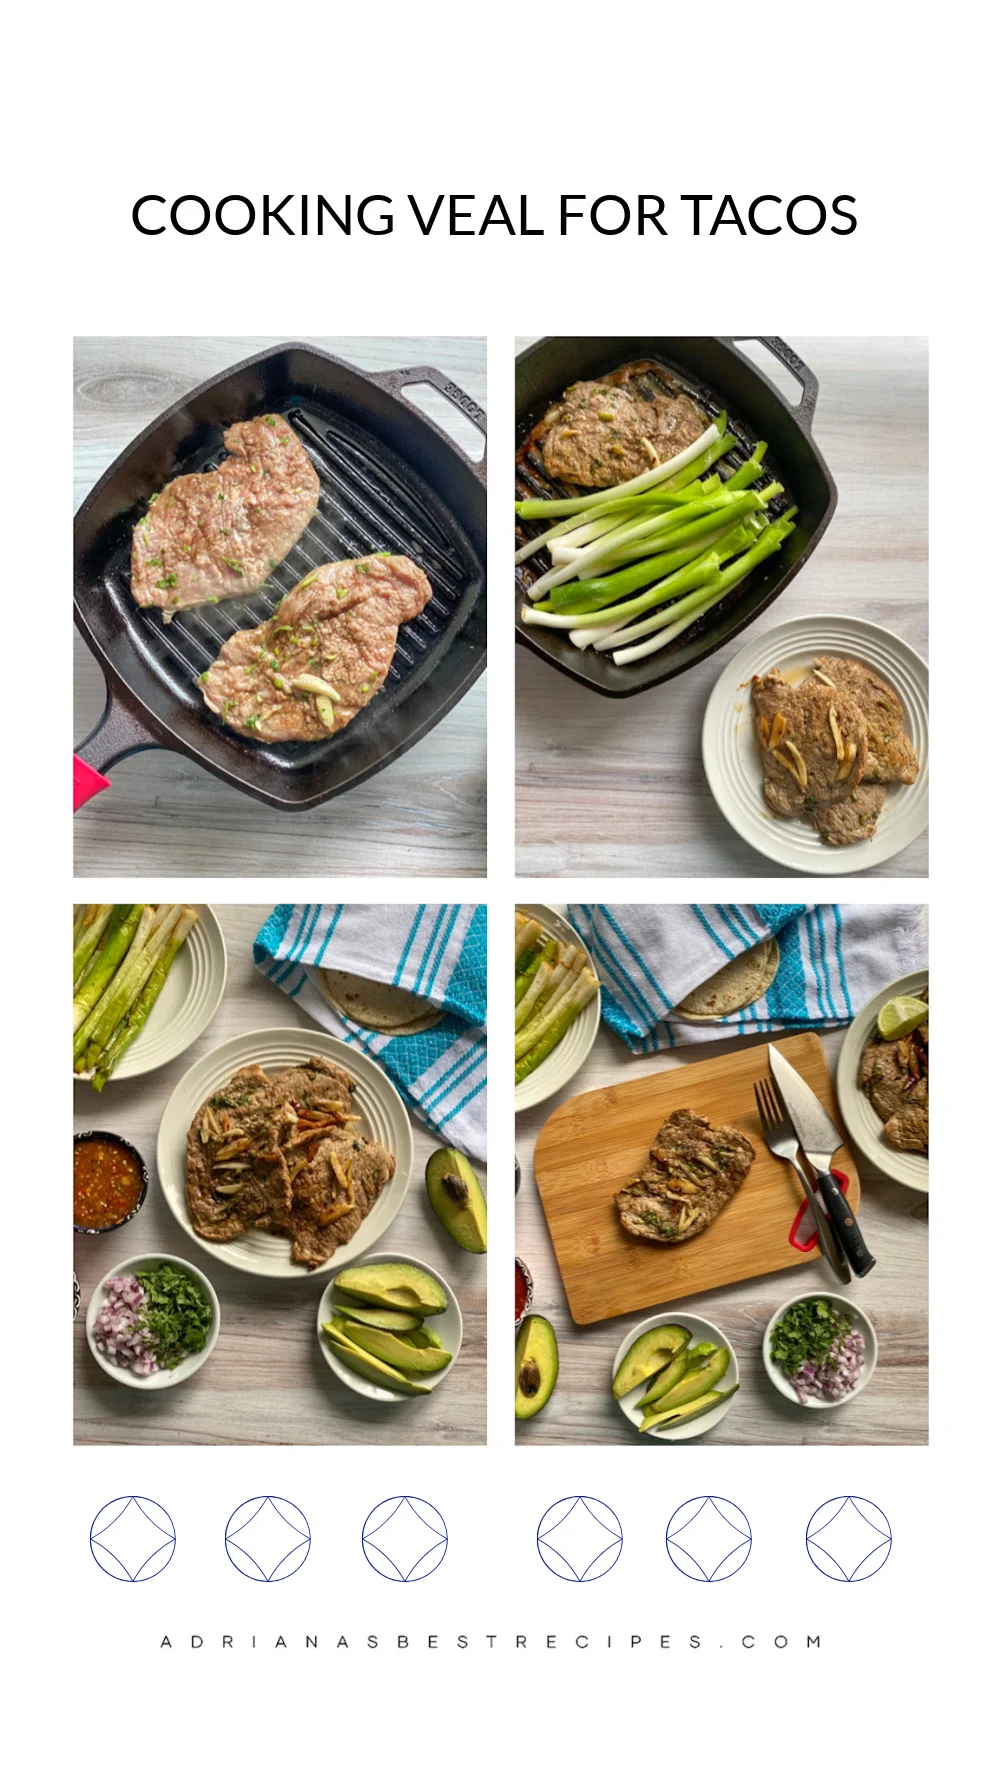 A collage showing how to cook meat in a grilling skillet